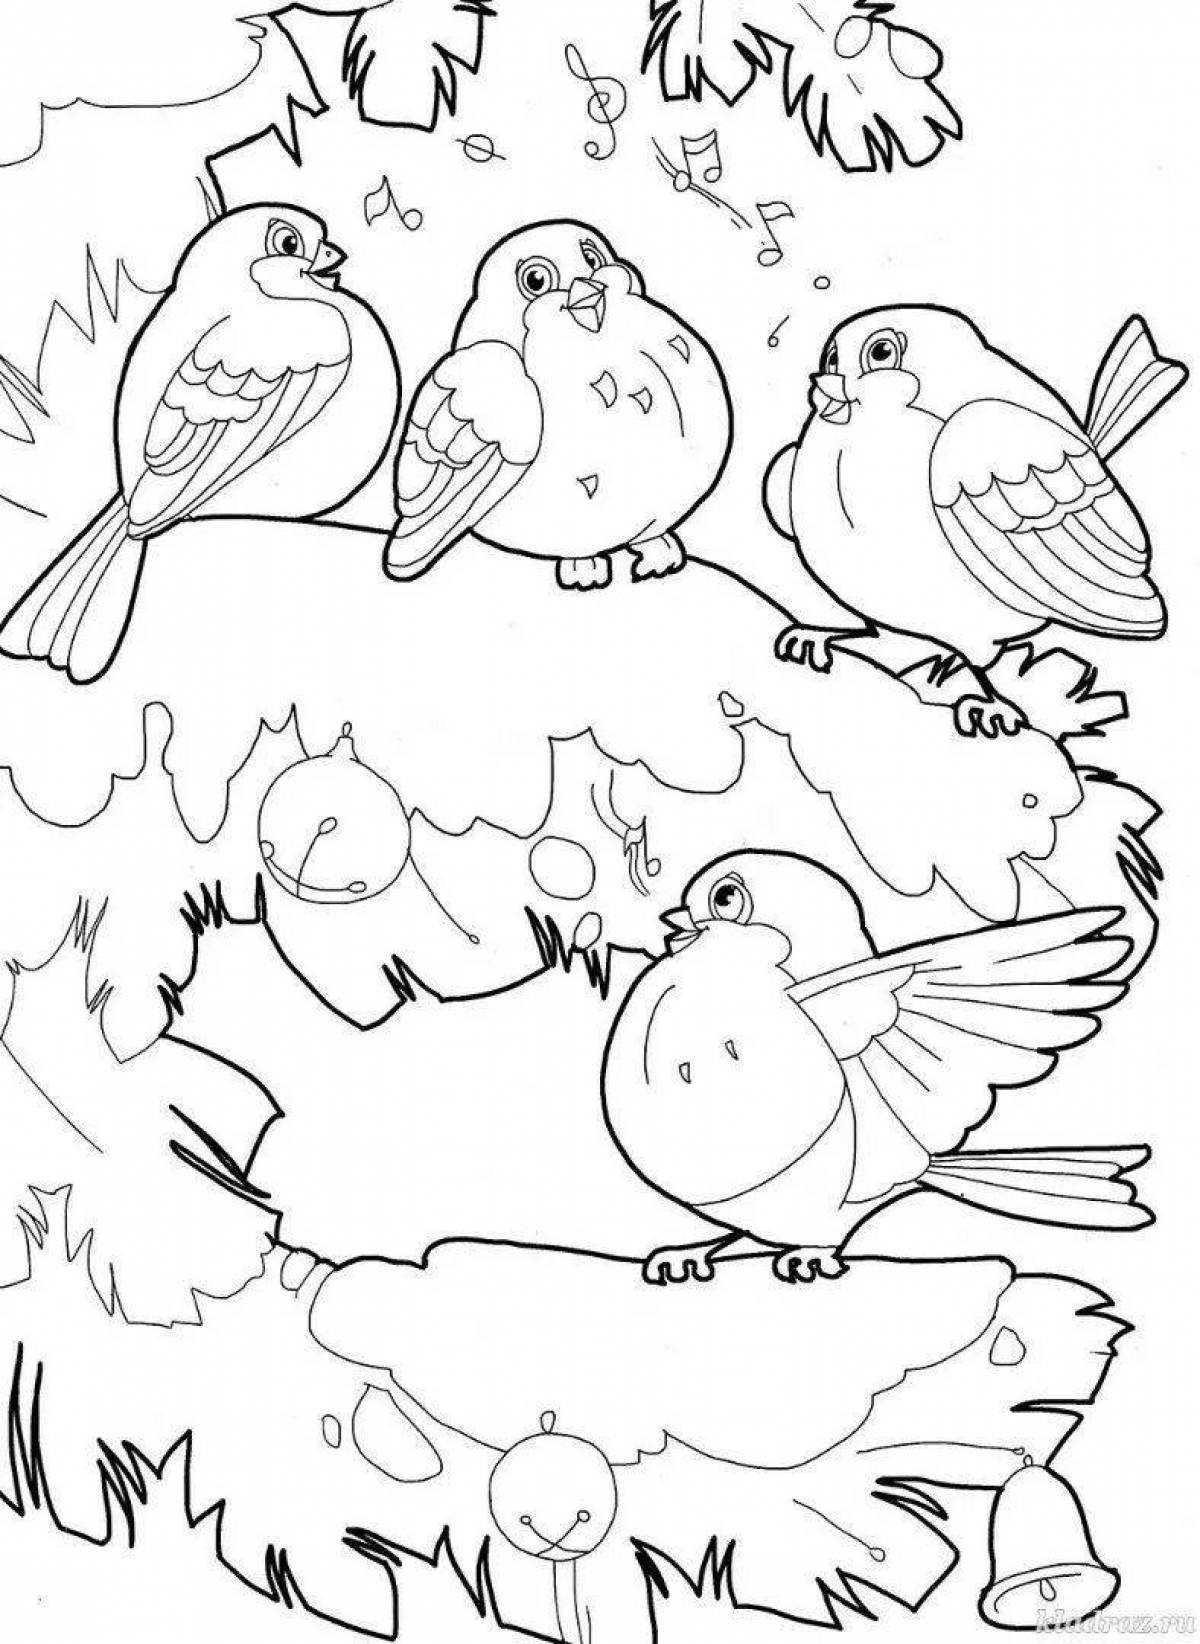 Coloring book dazzling wintering birds for children 3-4 years old